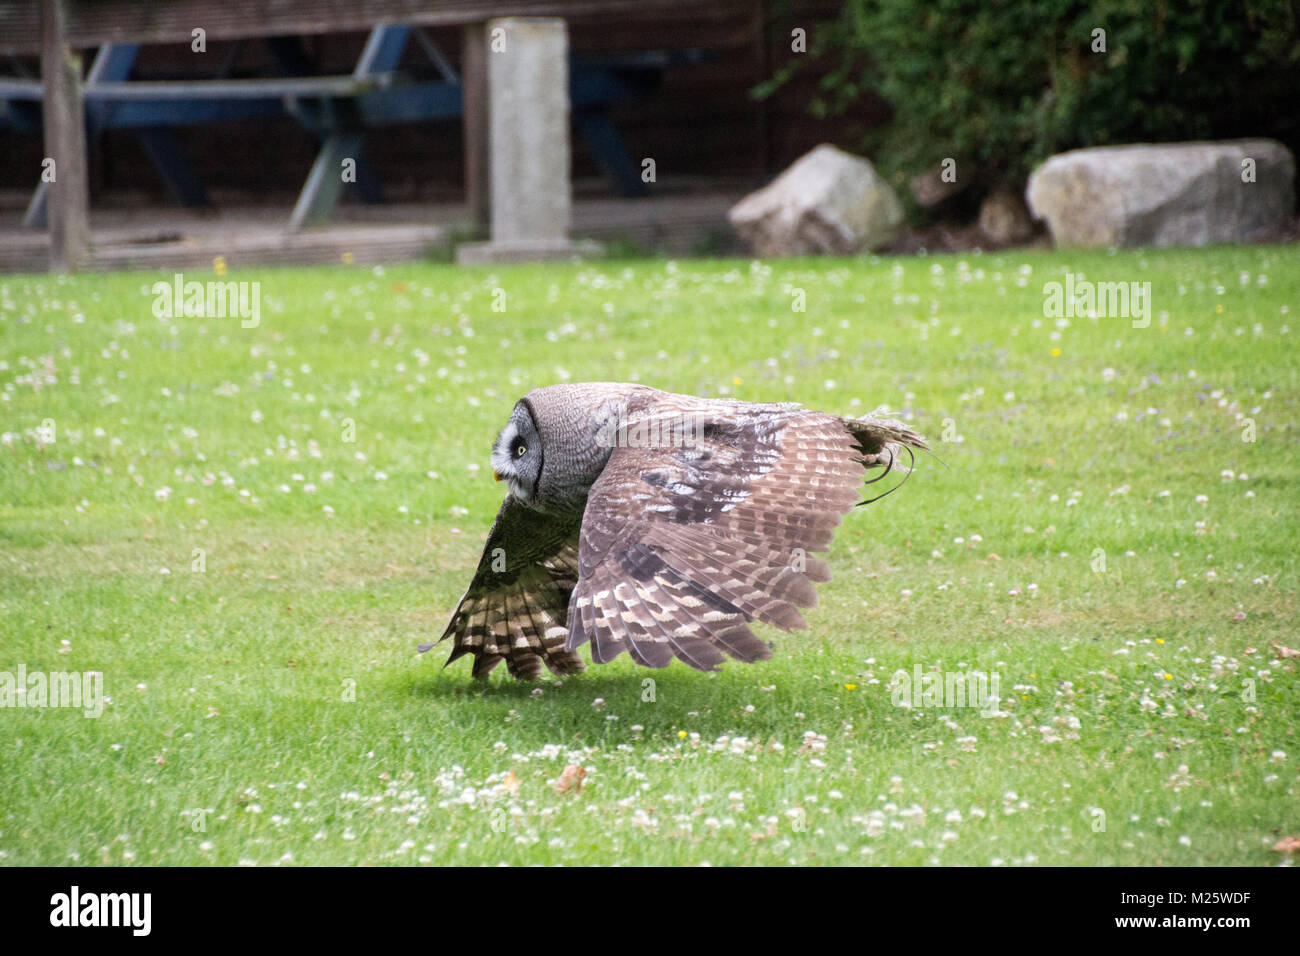 Great grey owl flying close to the ground during a flying display Stock Photo